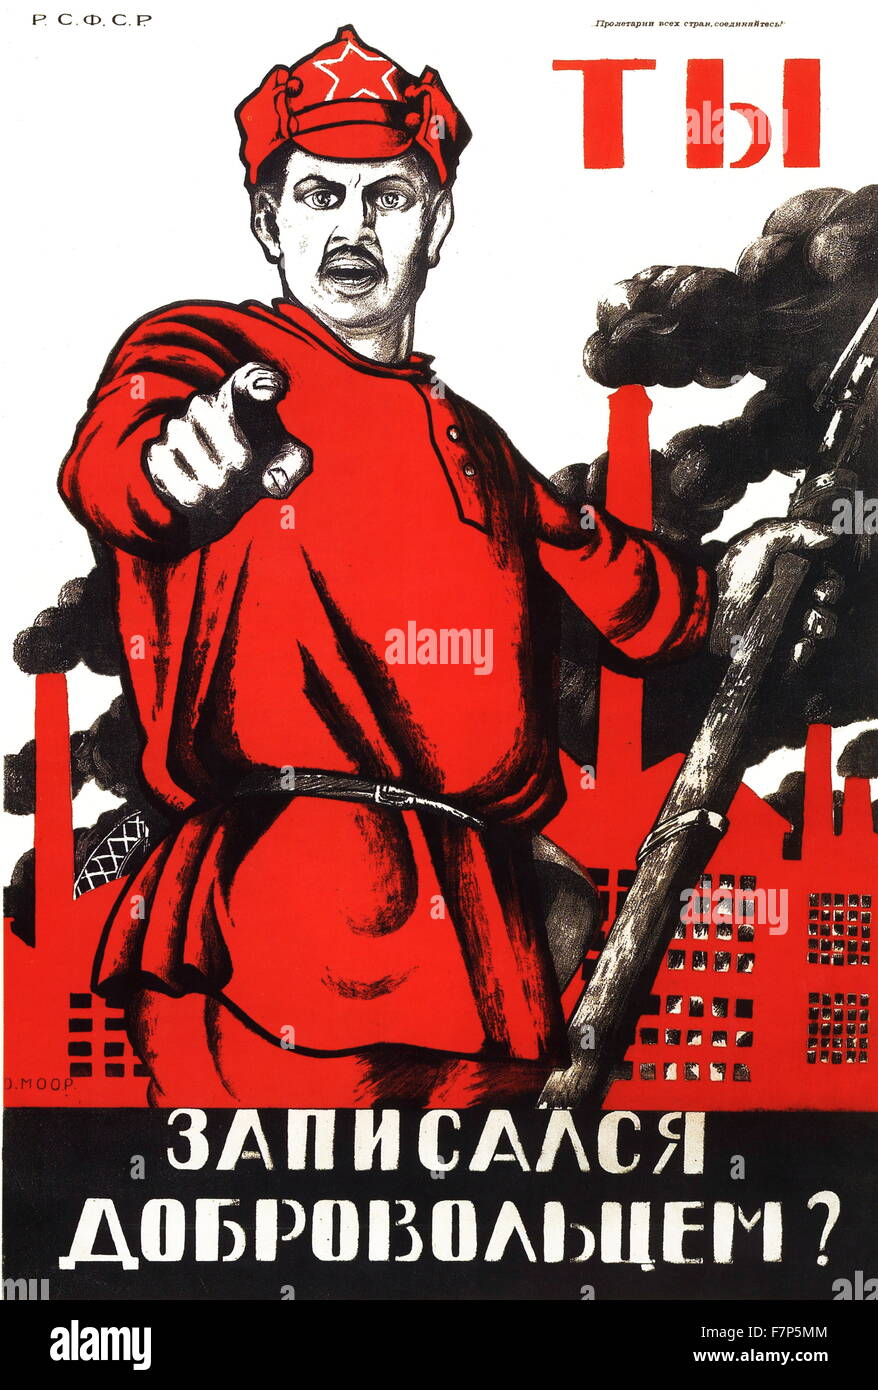 Russain propaganda poster by Dmitry Moor (1883-1946) (D. Moor the professional name of Dmitry Stakhievich Orlov) a Russian artist noted for his propaganda posters. Graphic Design - Soviet Russia 1918 One of the distinct types of posters design are evident. Dated 1920 Stock Photo